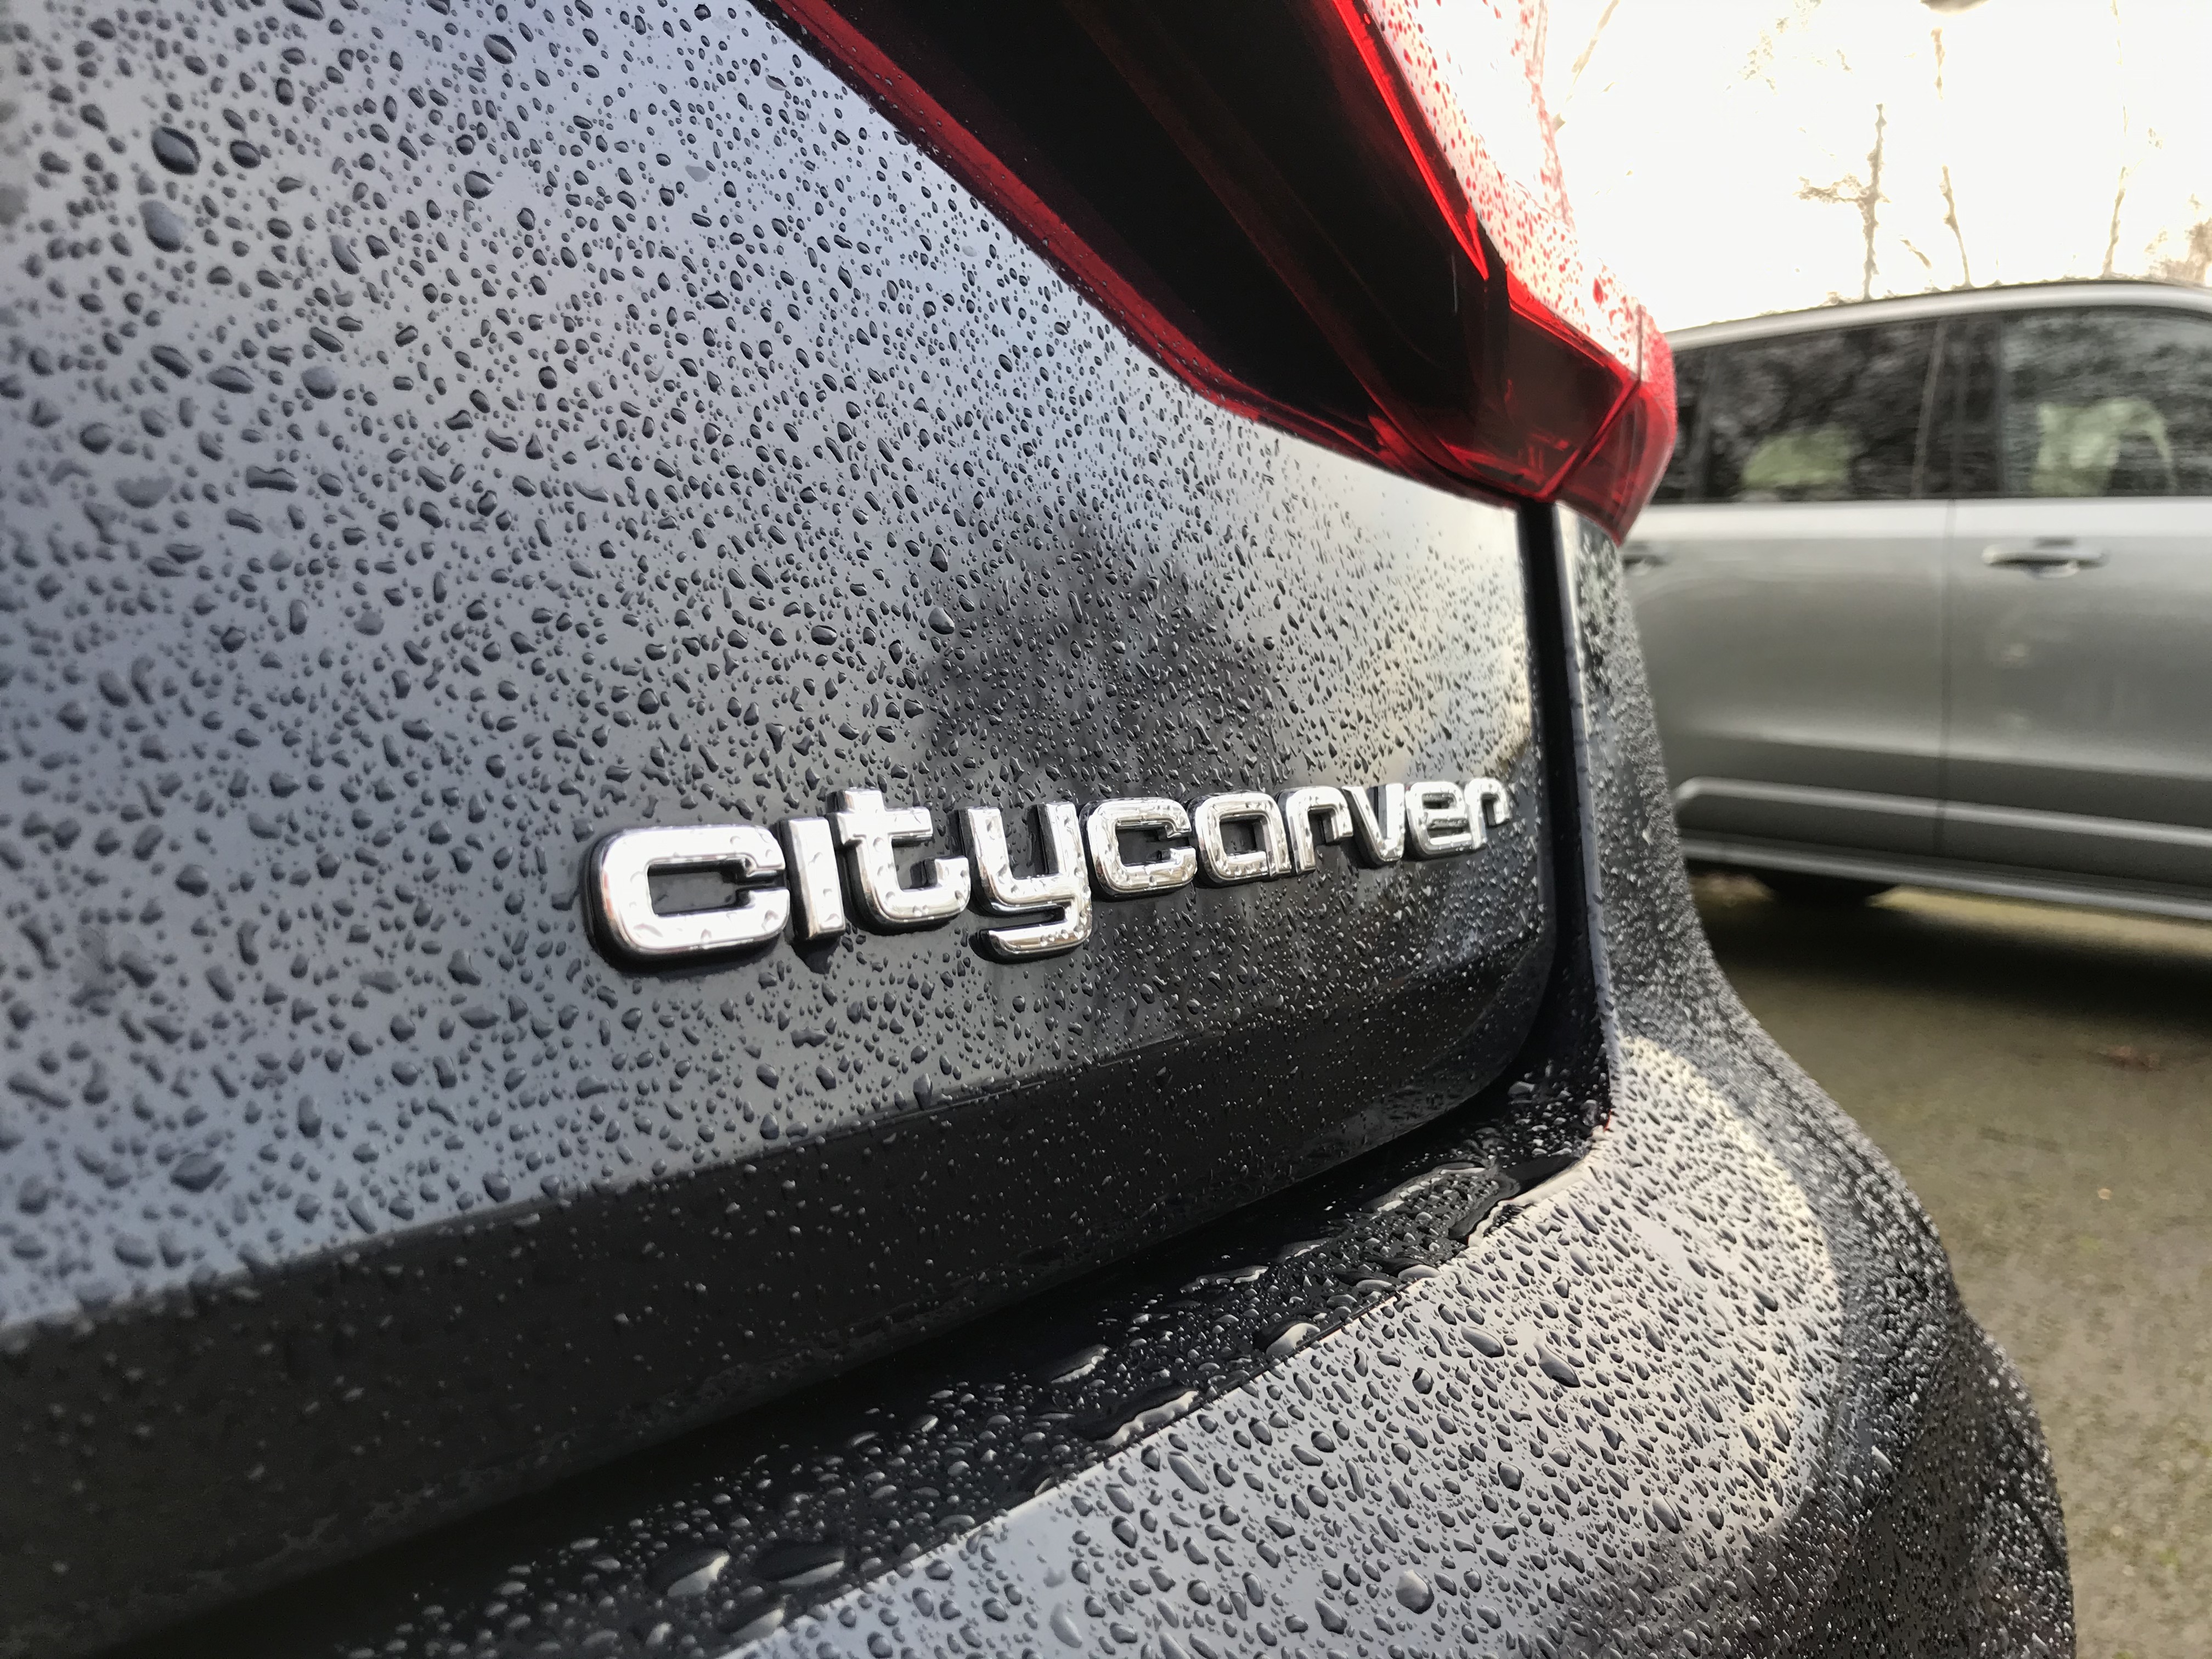 The Citycarver is a beefed-up version of the A1